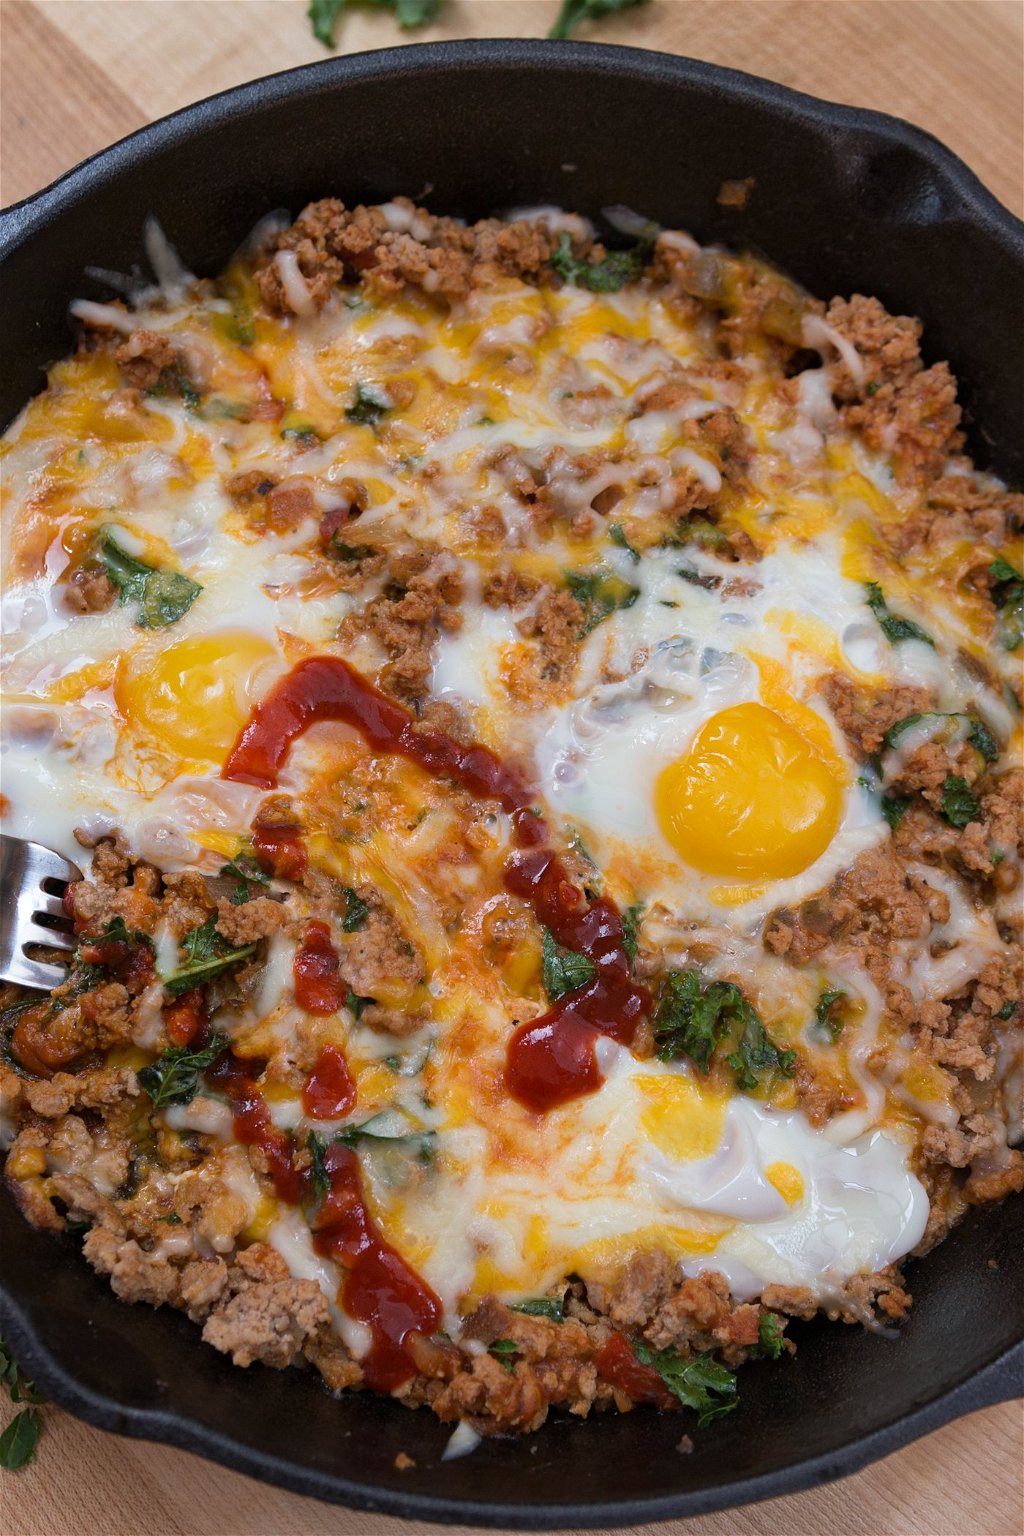 https://media.theproteinchef.co/wp-content/uploads/2015/12/Low-Carb-Breakfast-Skillet-Recipe.jpg